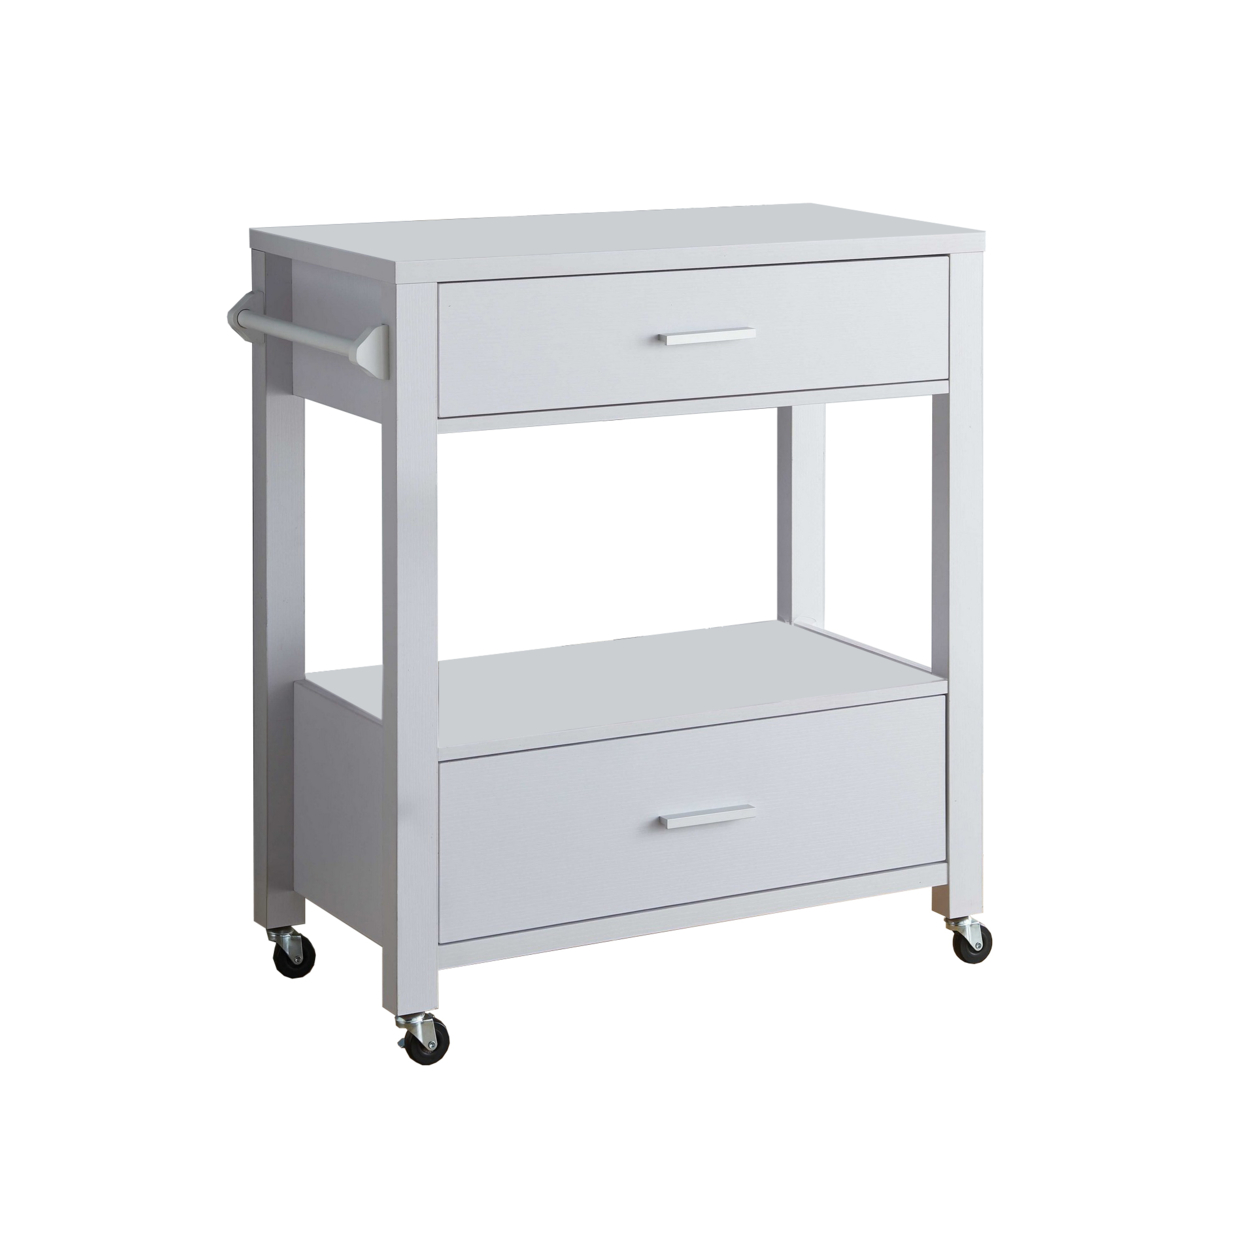 2 Drawer Wooden Kitchen Cart With Casters And 1 Open Shelf, White- Saltoro Sherpi